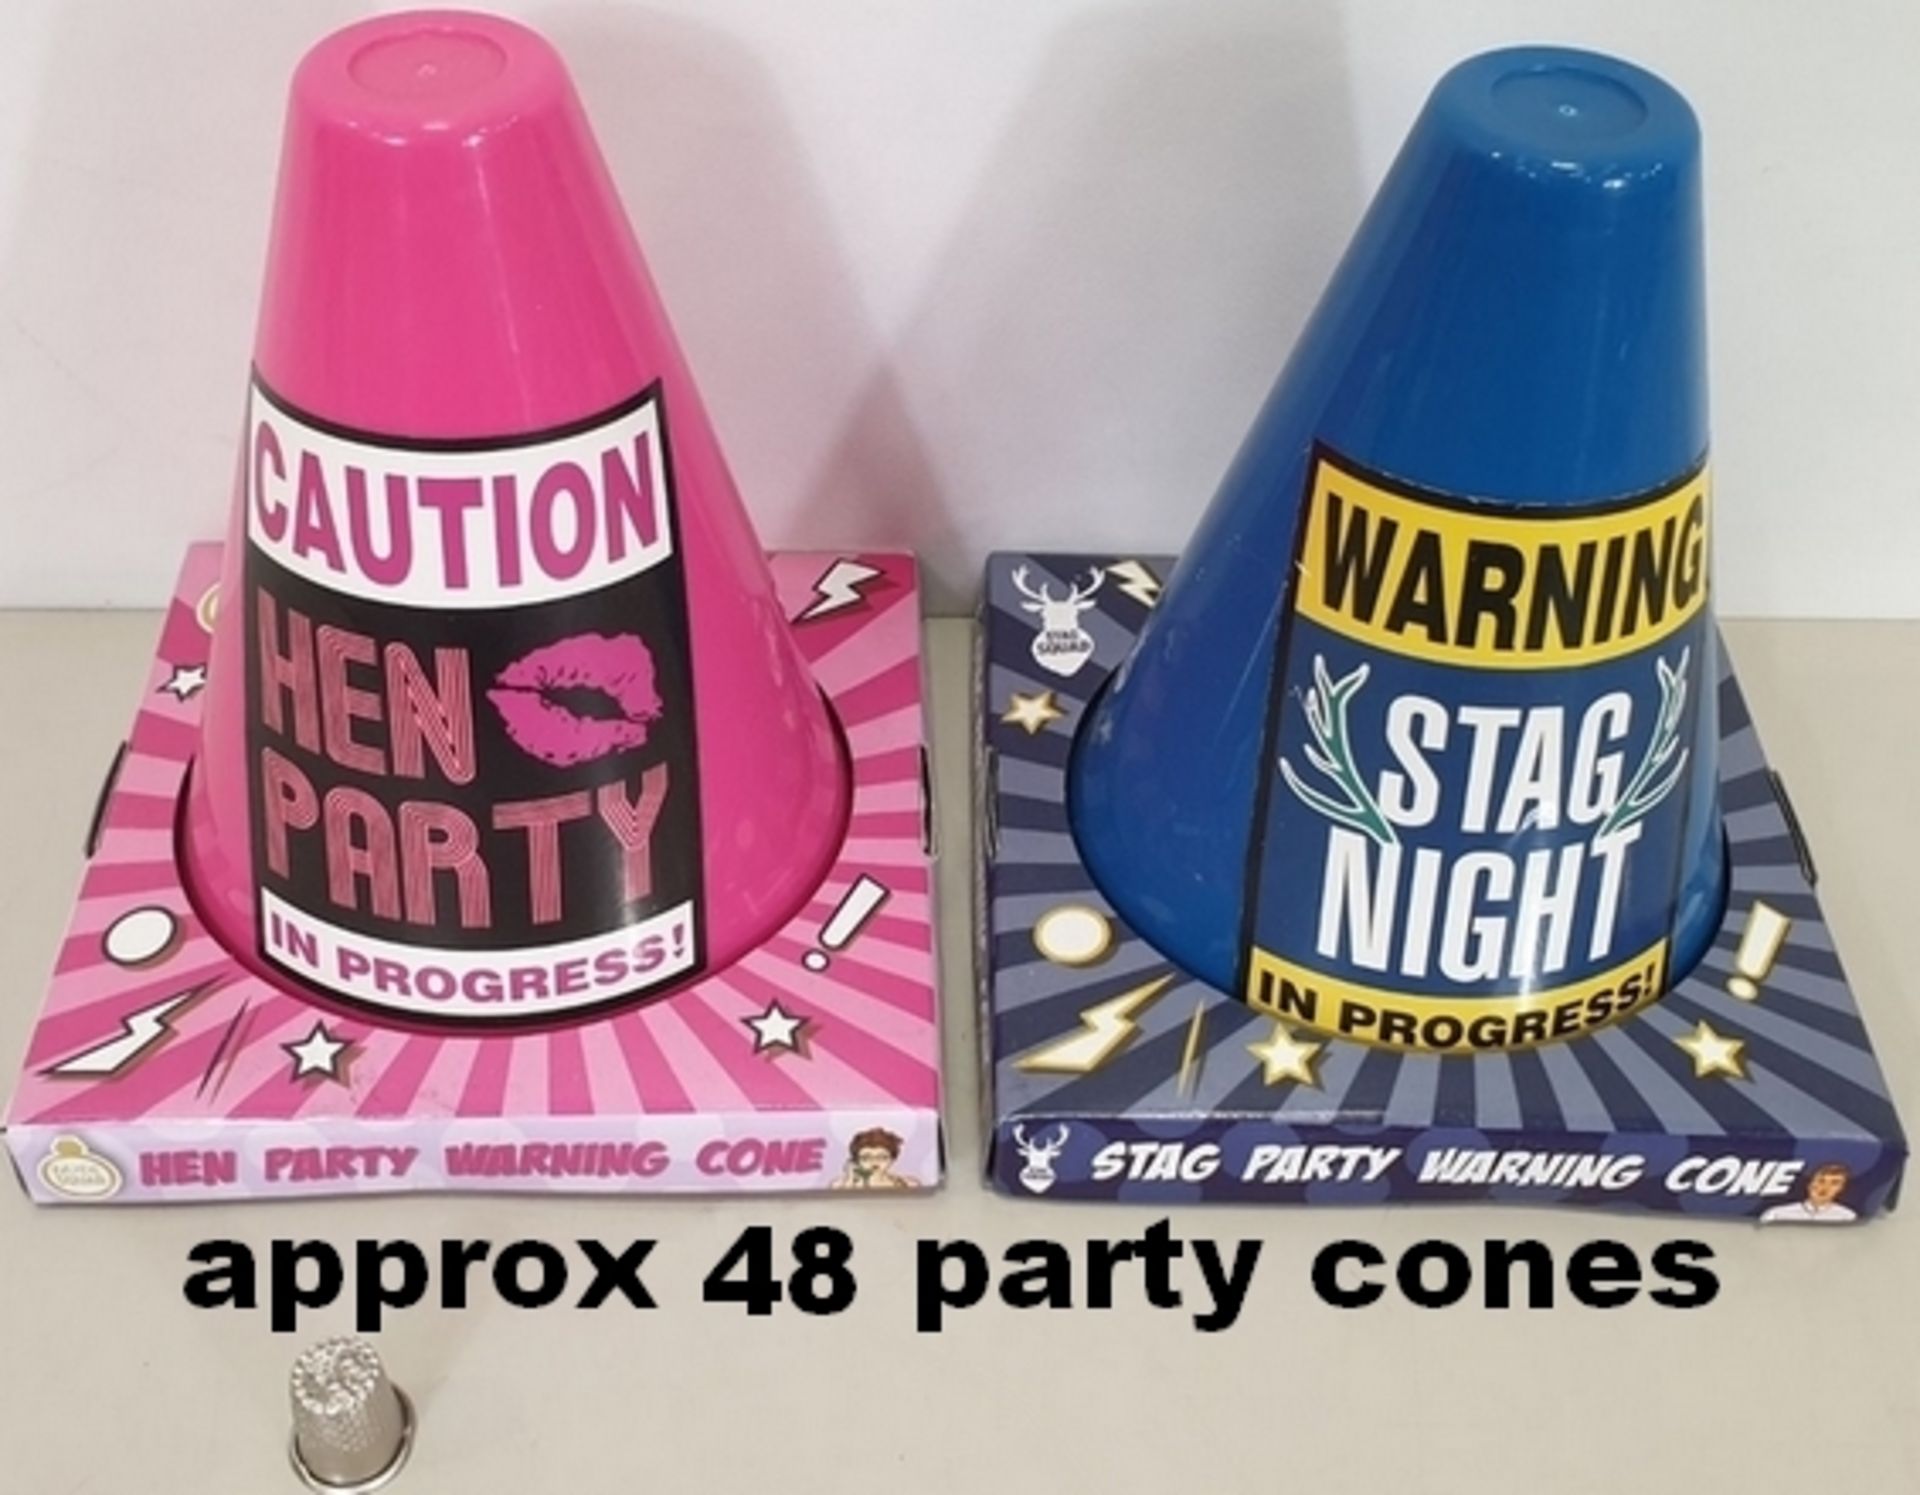 72 Party cones No parties at the moment but